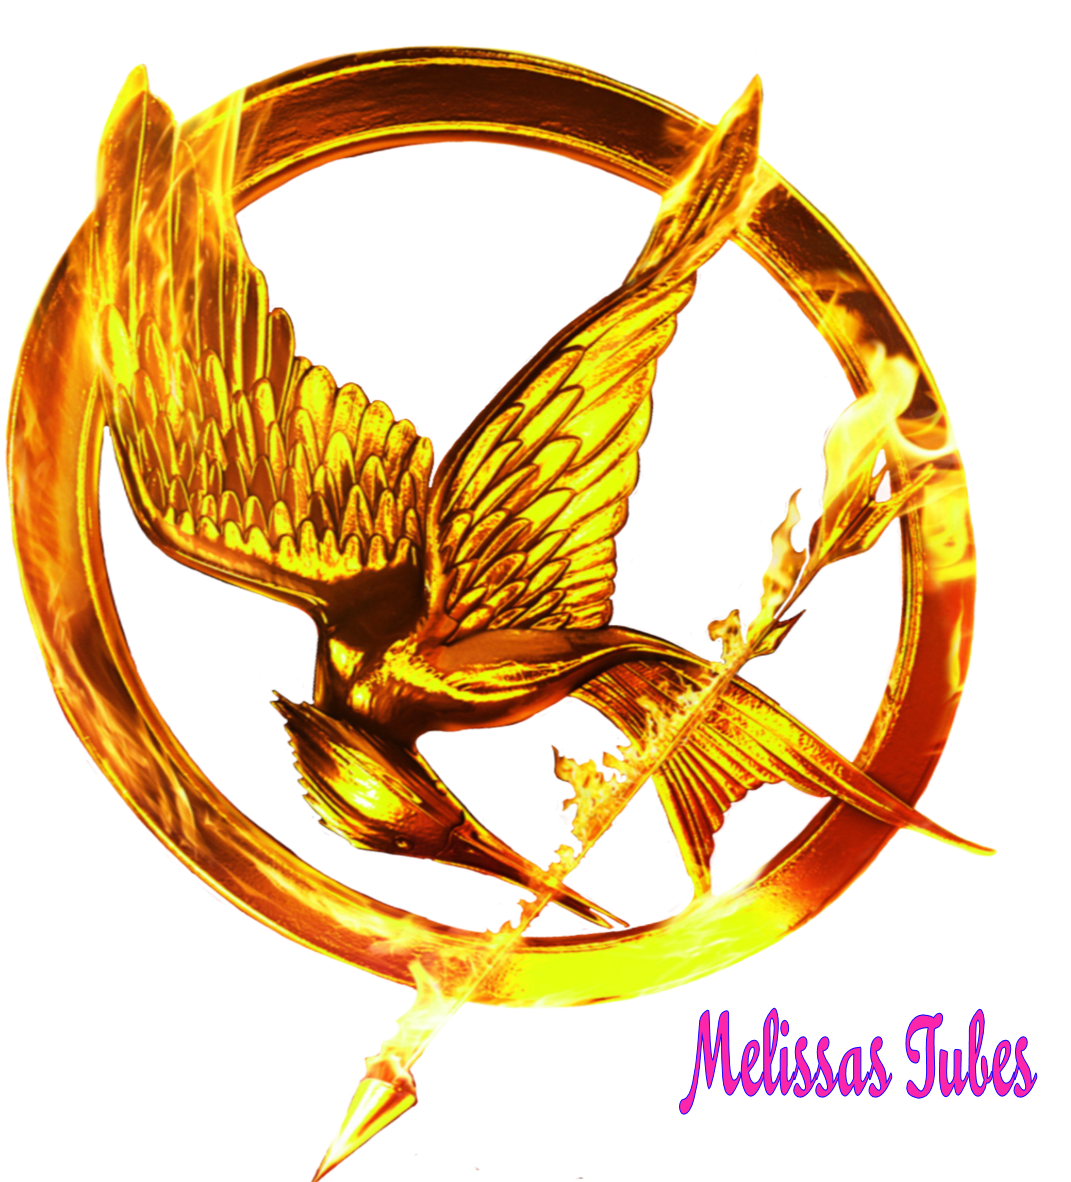 hunger games clip art free - photo #7